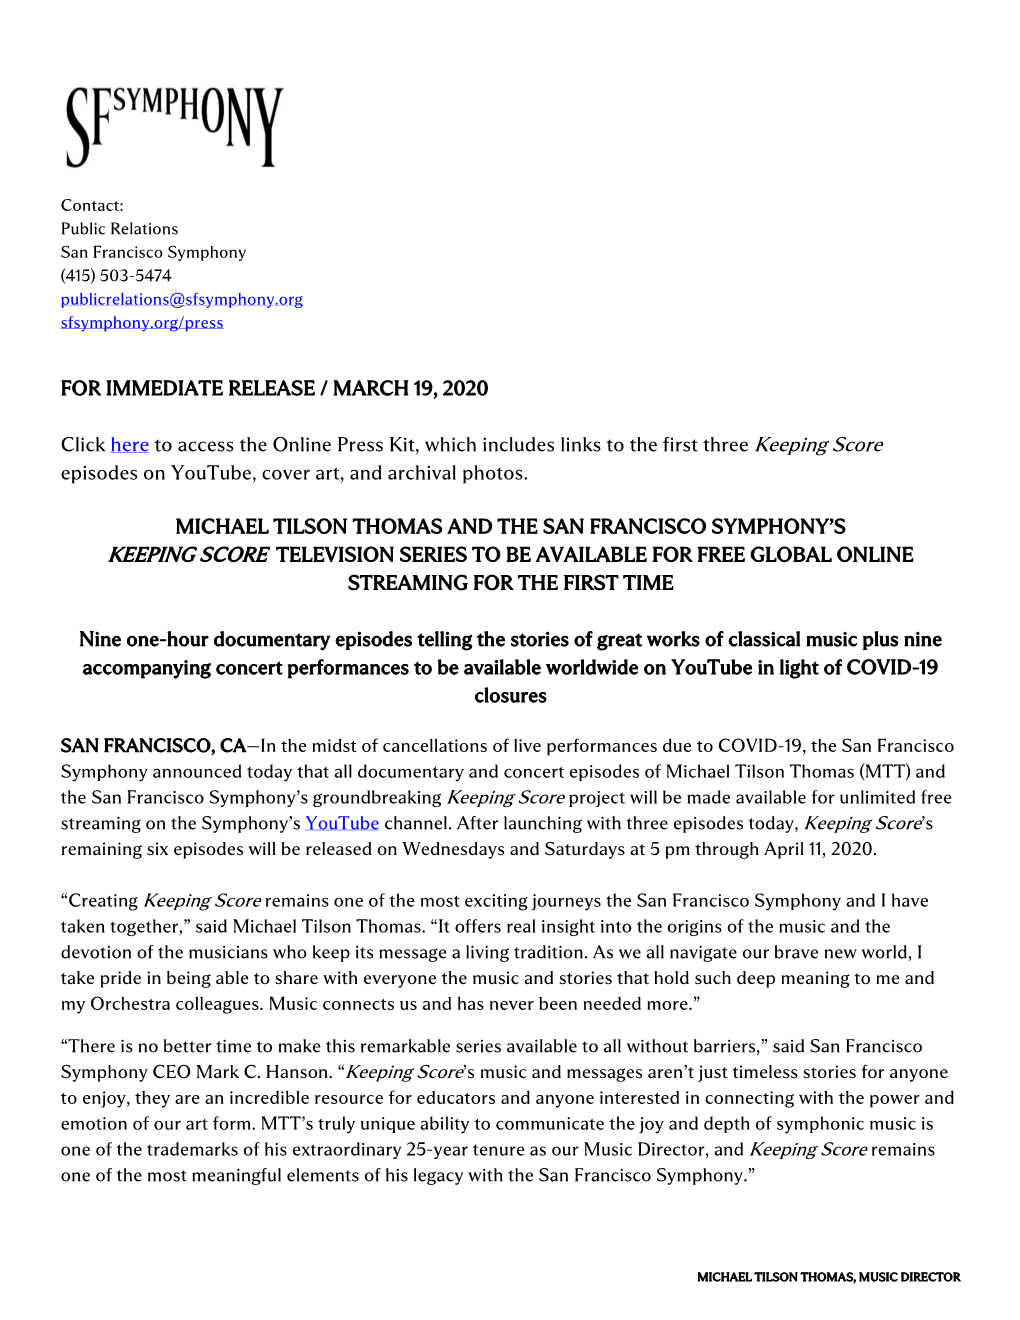 FOR IMMEDIATE RELEASE / MARCH 19, 2020 Click Here to Access The